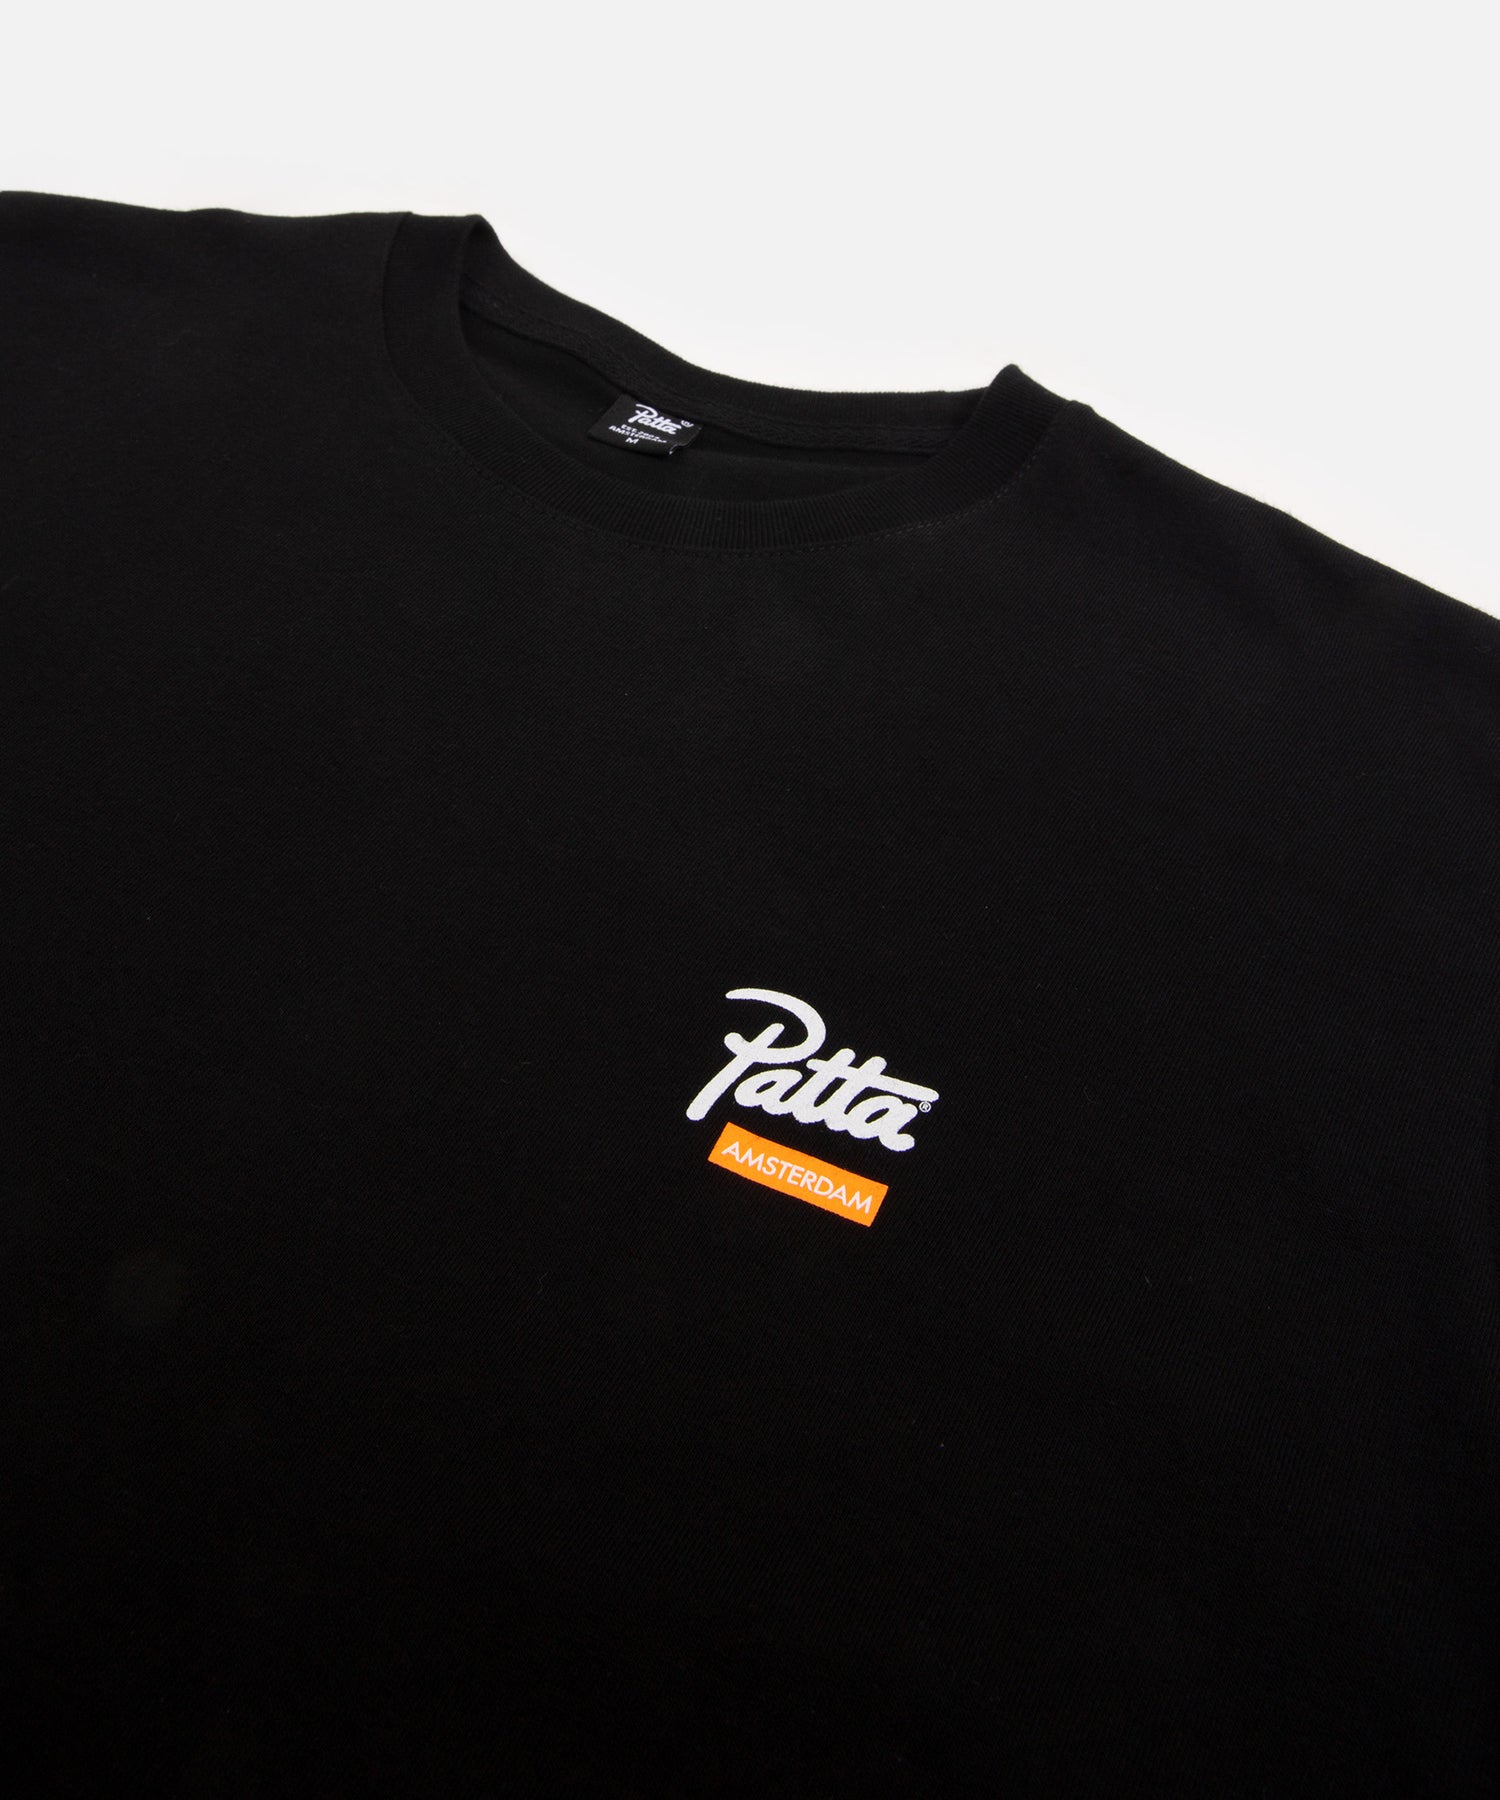 In-Store Exclusives – Patta